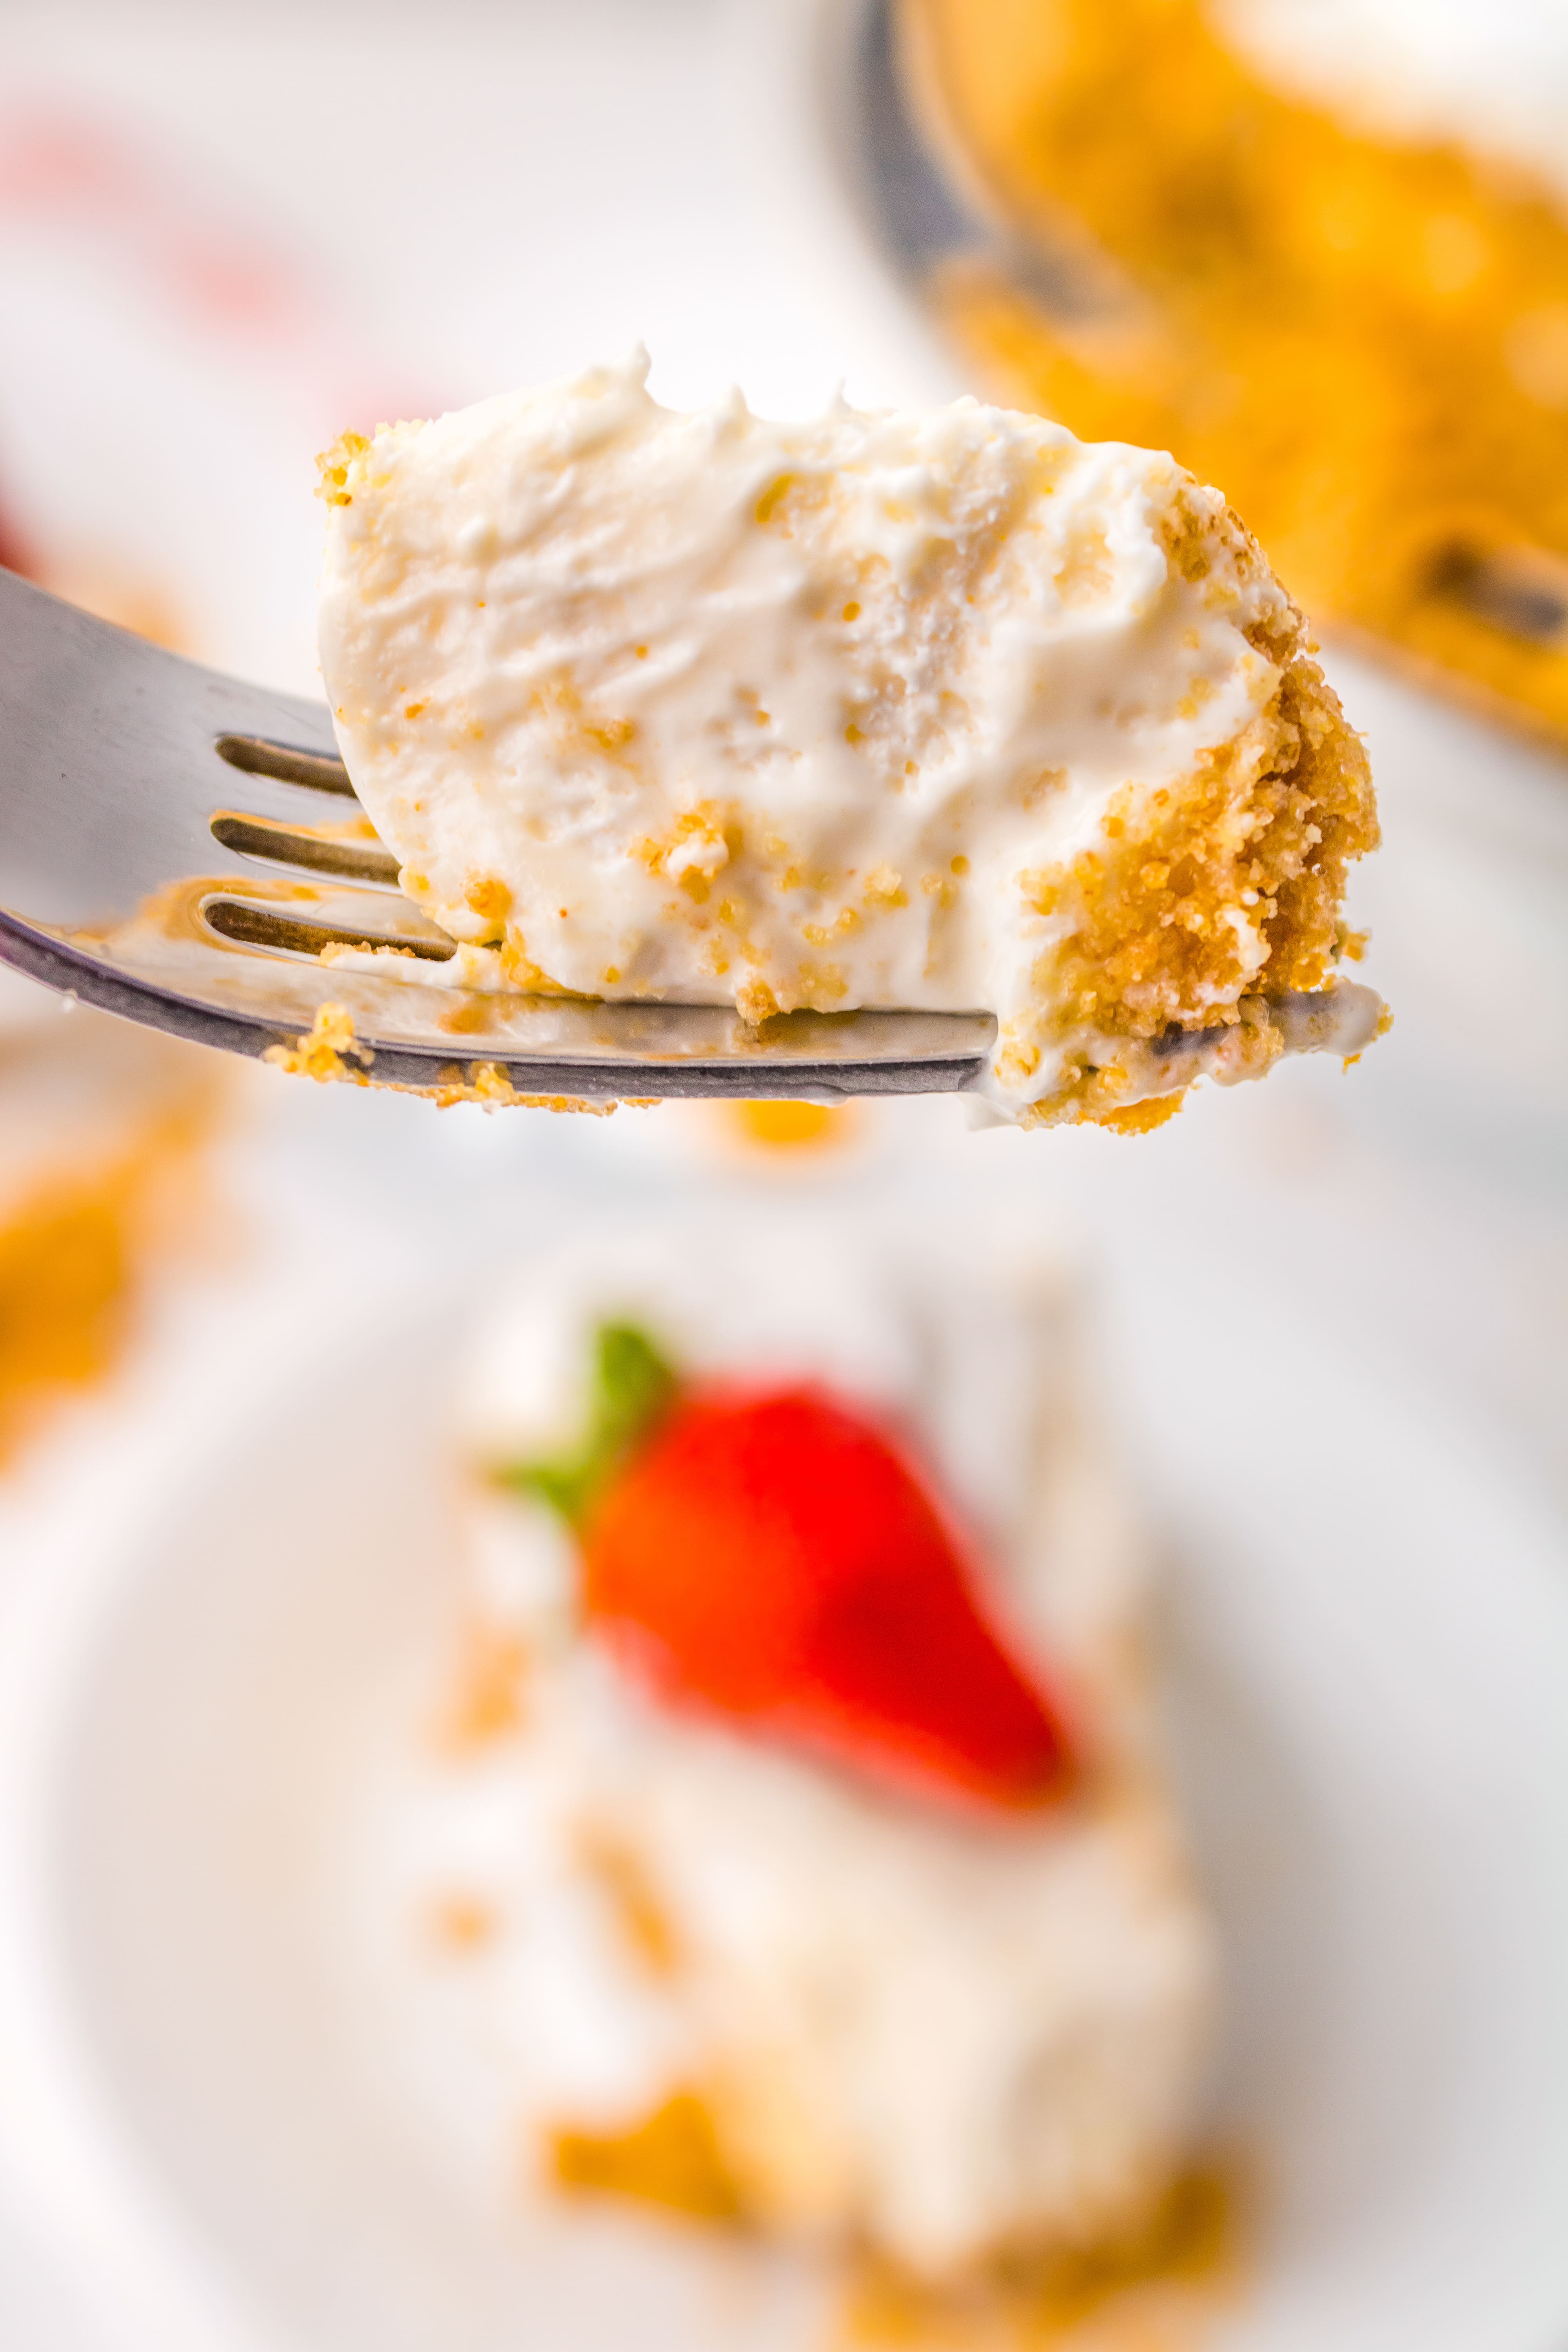 A bite of creamy cheesecake on a fork.